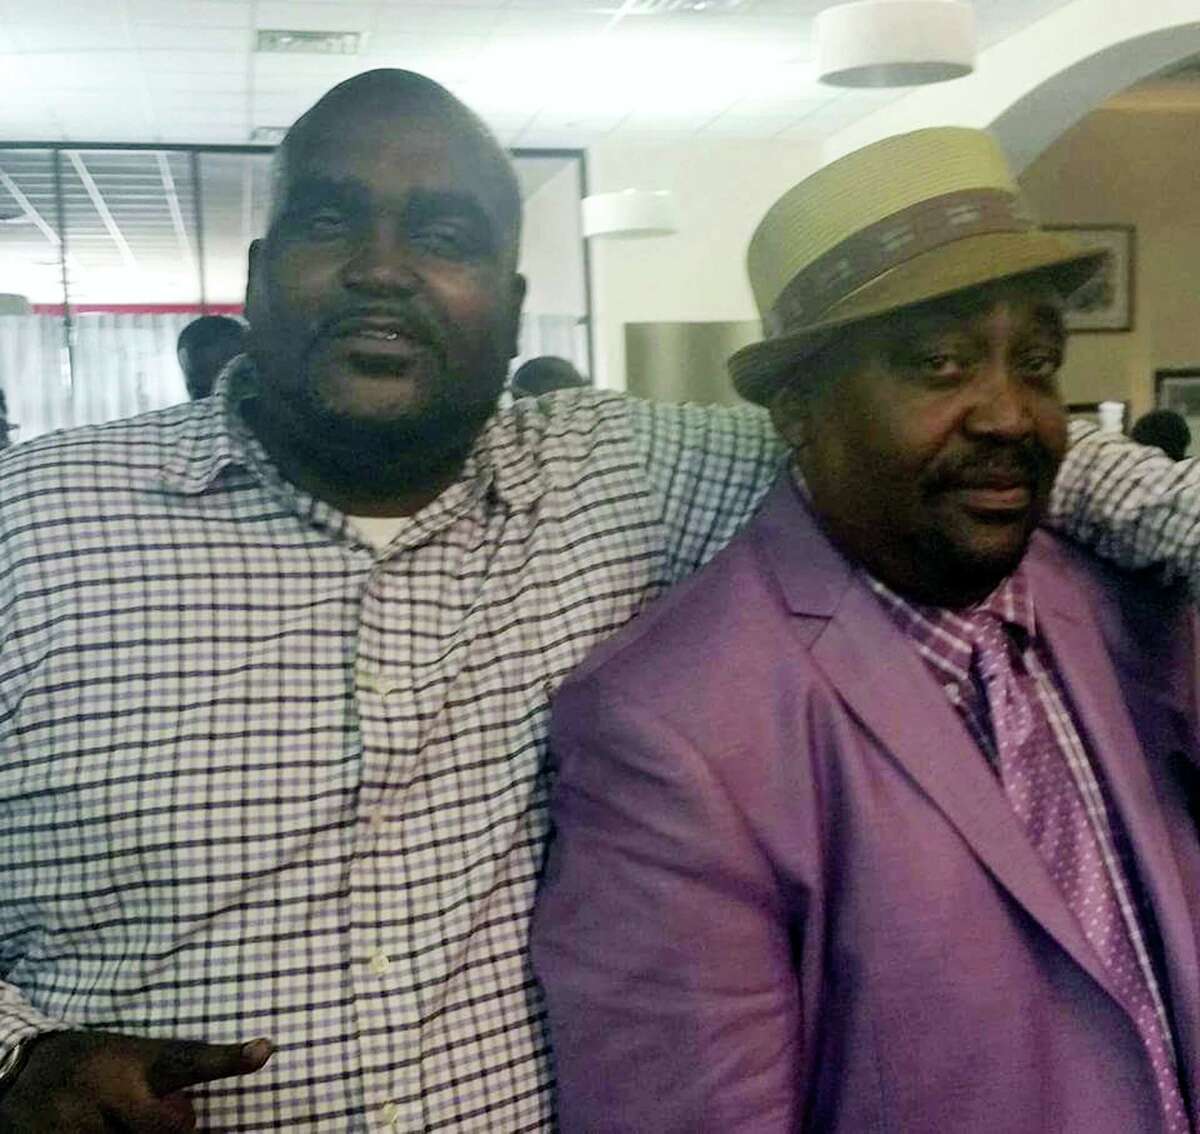 This undated photo provided by the Parks & Crump, LLC shows Terence Crutcher, left, with his father, Joey Crutcher. Crutcher, an unarmed black man, was killed by a white Oklahoma officer on Sept. 16, 2016 who was responding to a stalled vehicle.